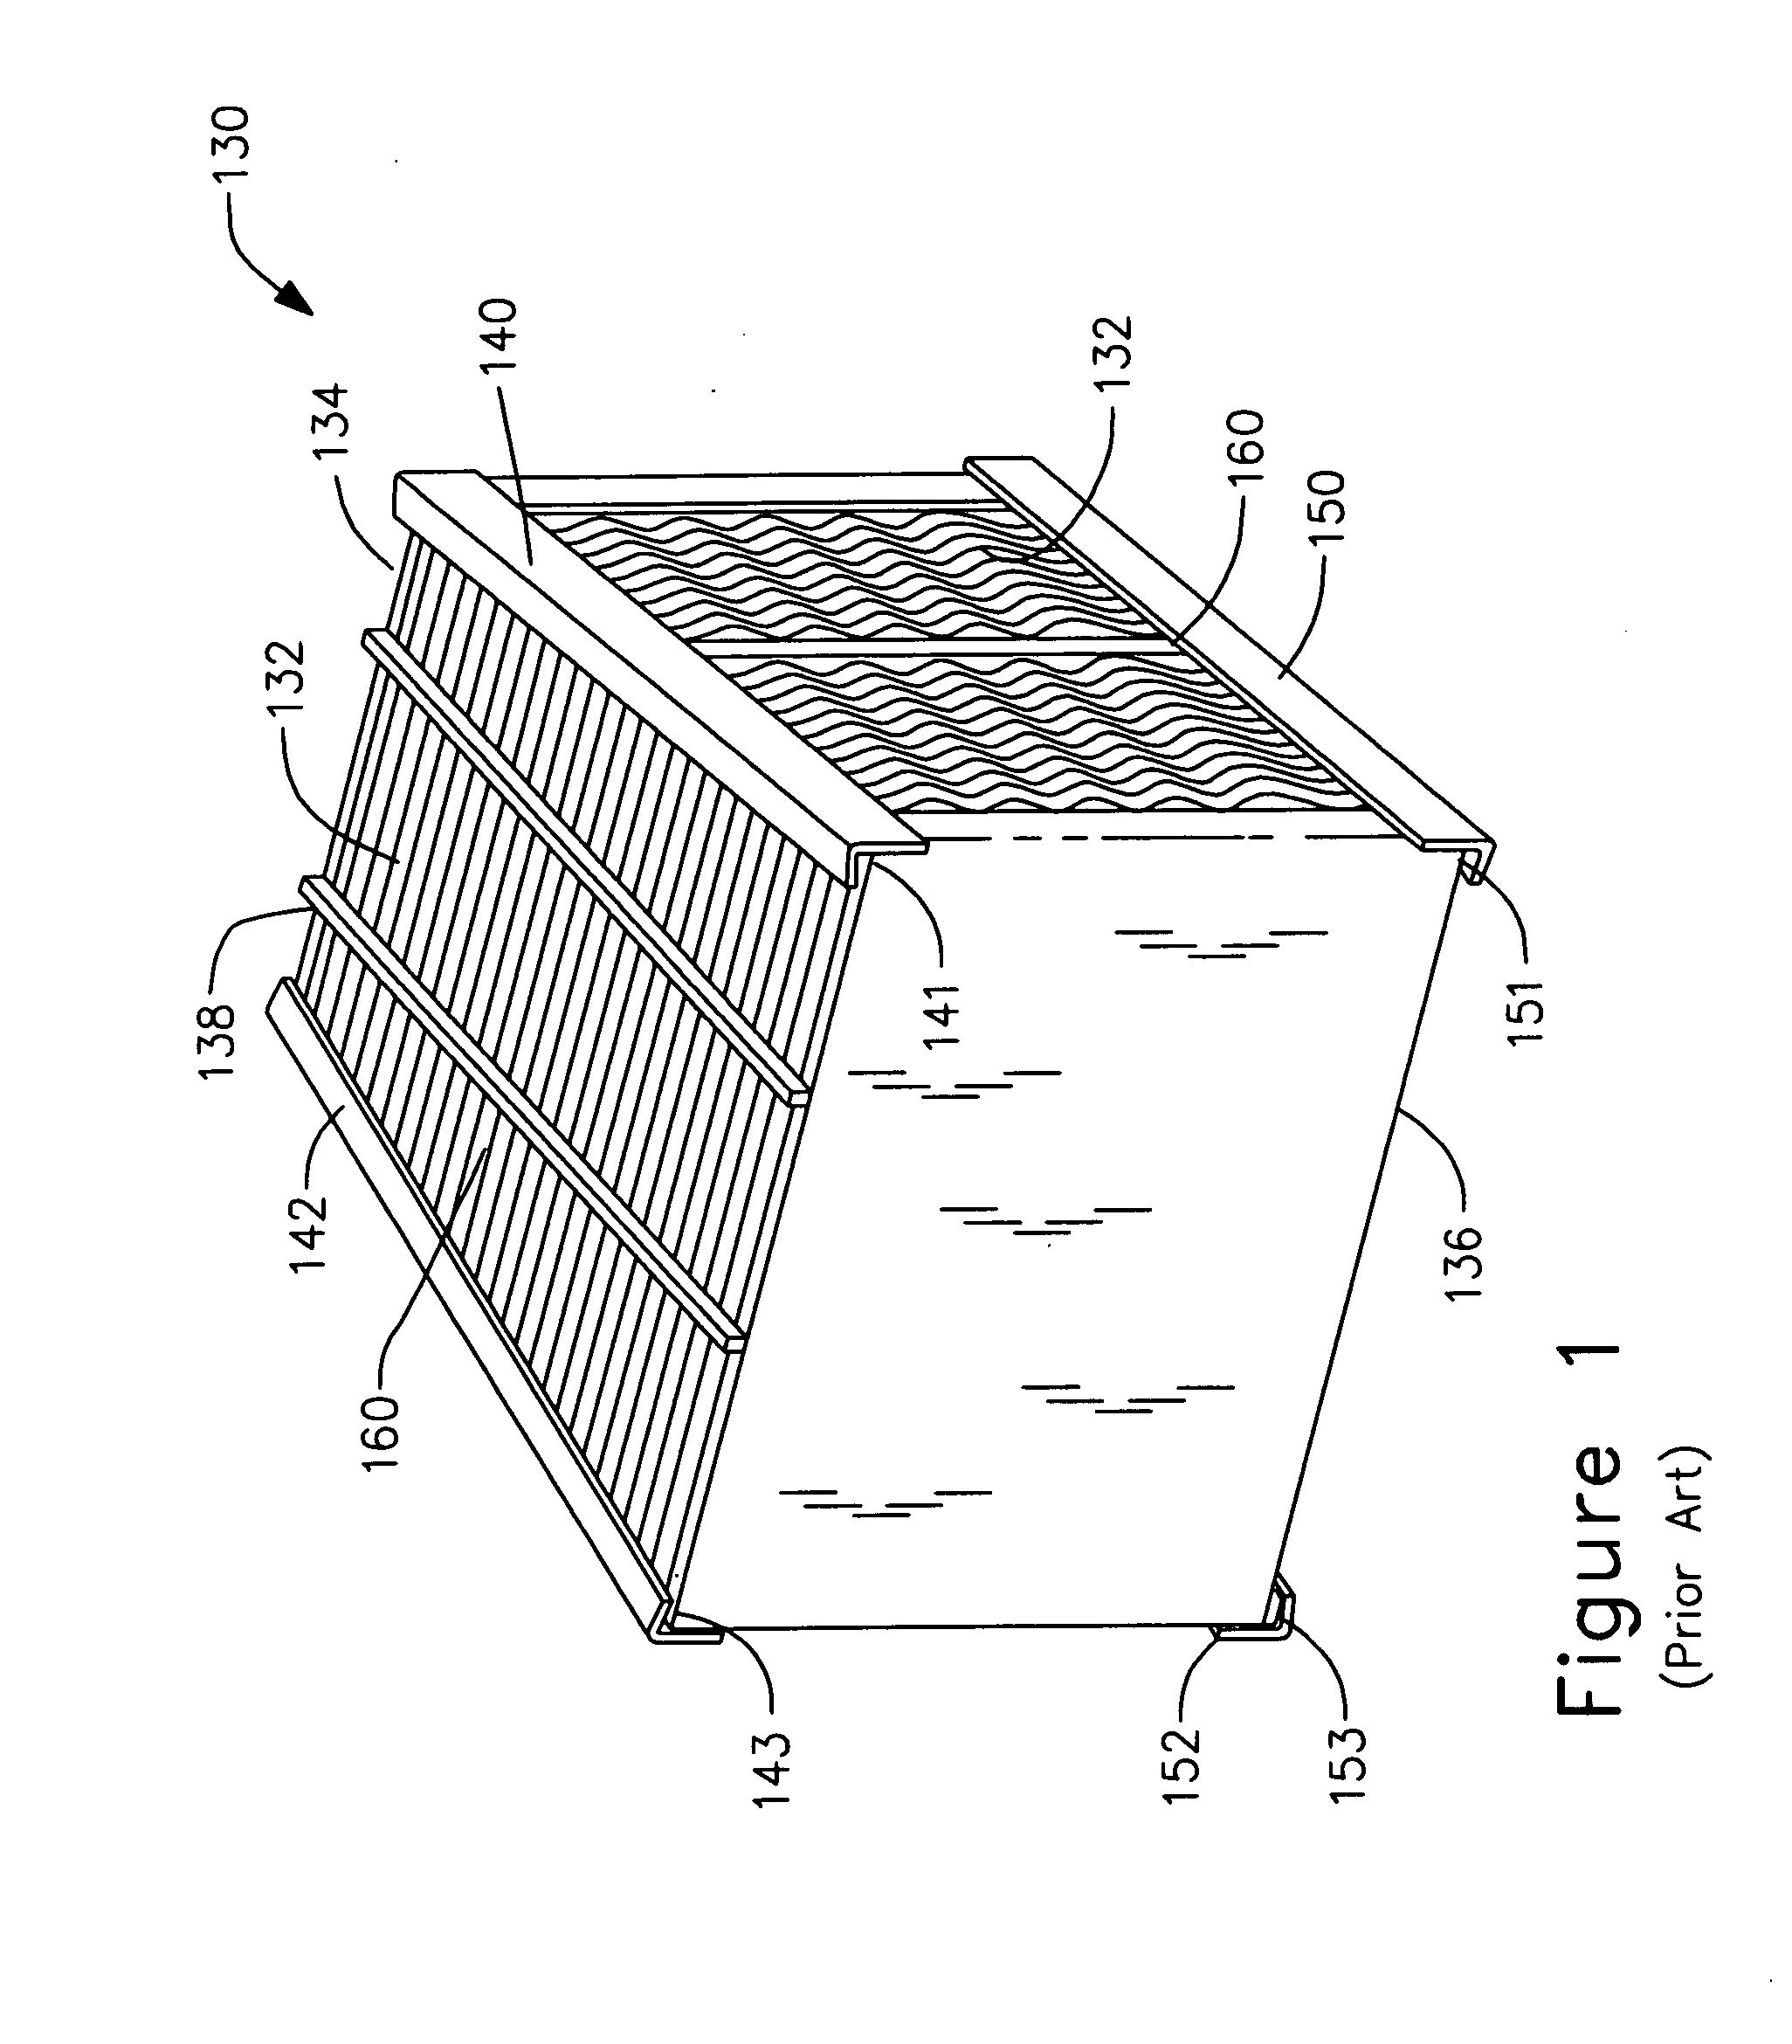 Reversible heat transfer element basket assembly with integrated frame for use in a heat exchanger